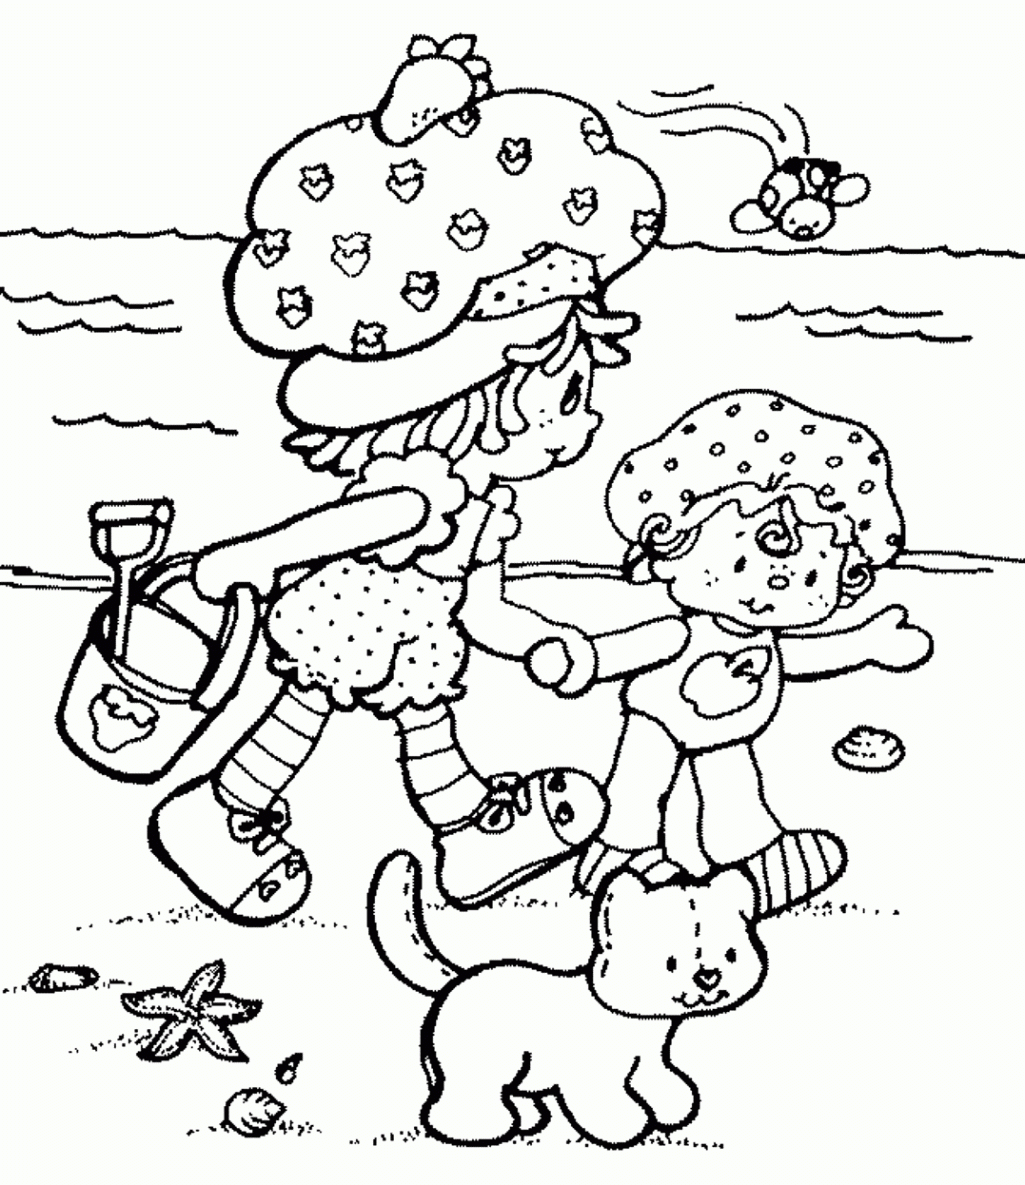 Fancy Summer Beach Coloring Pages For Kids Free Printable For Boy ...